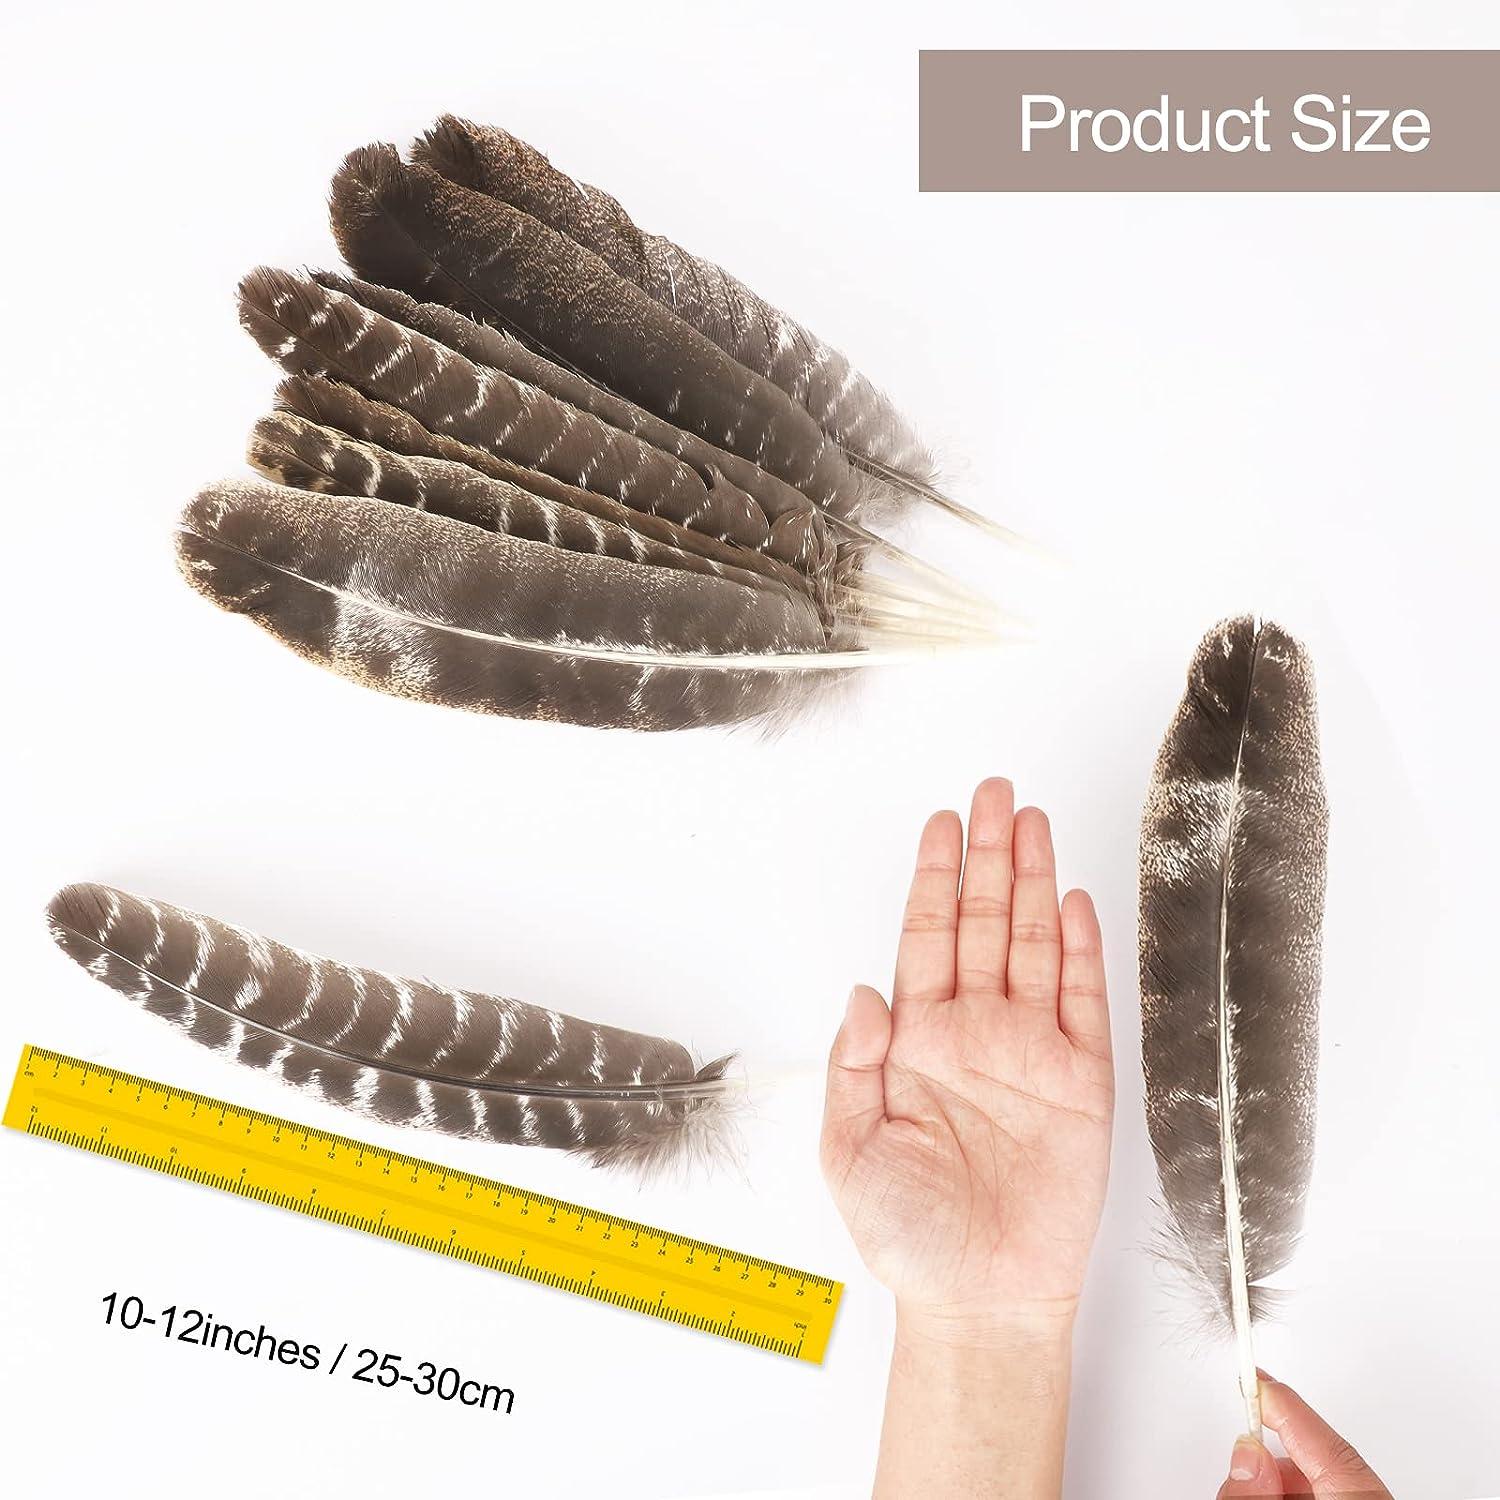 50 pcs 10-16 Inches Natural Knife Shape Turkey Feathers For Crafts DIY